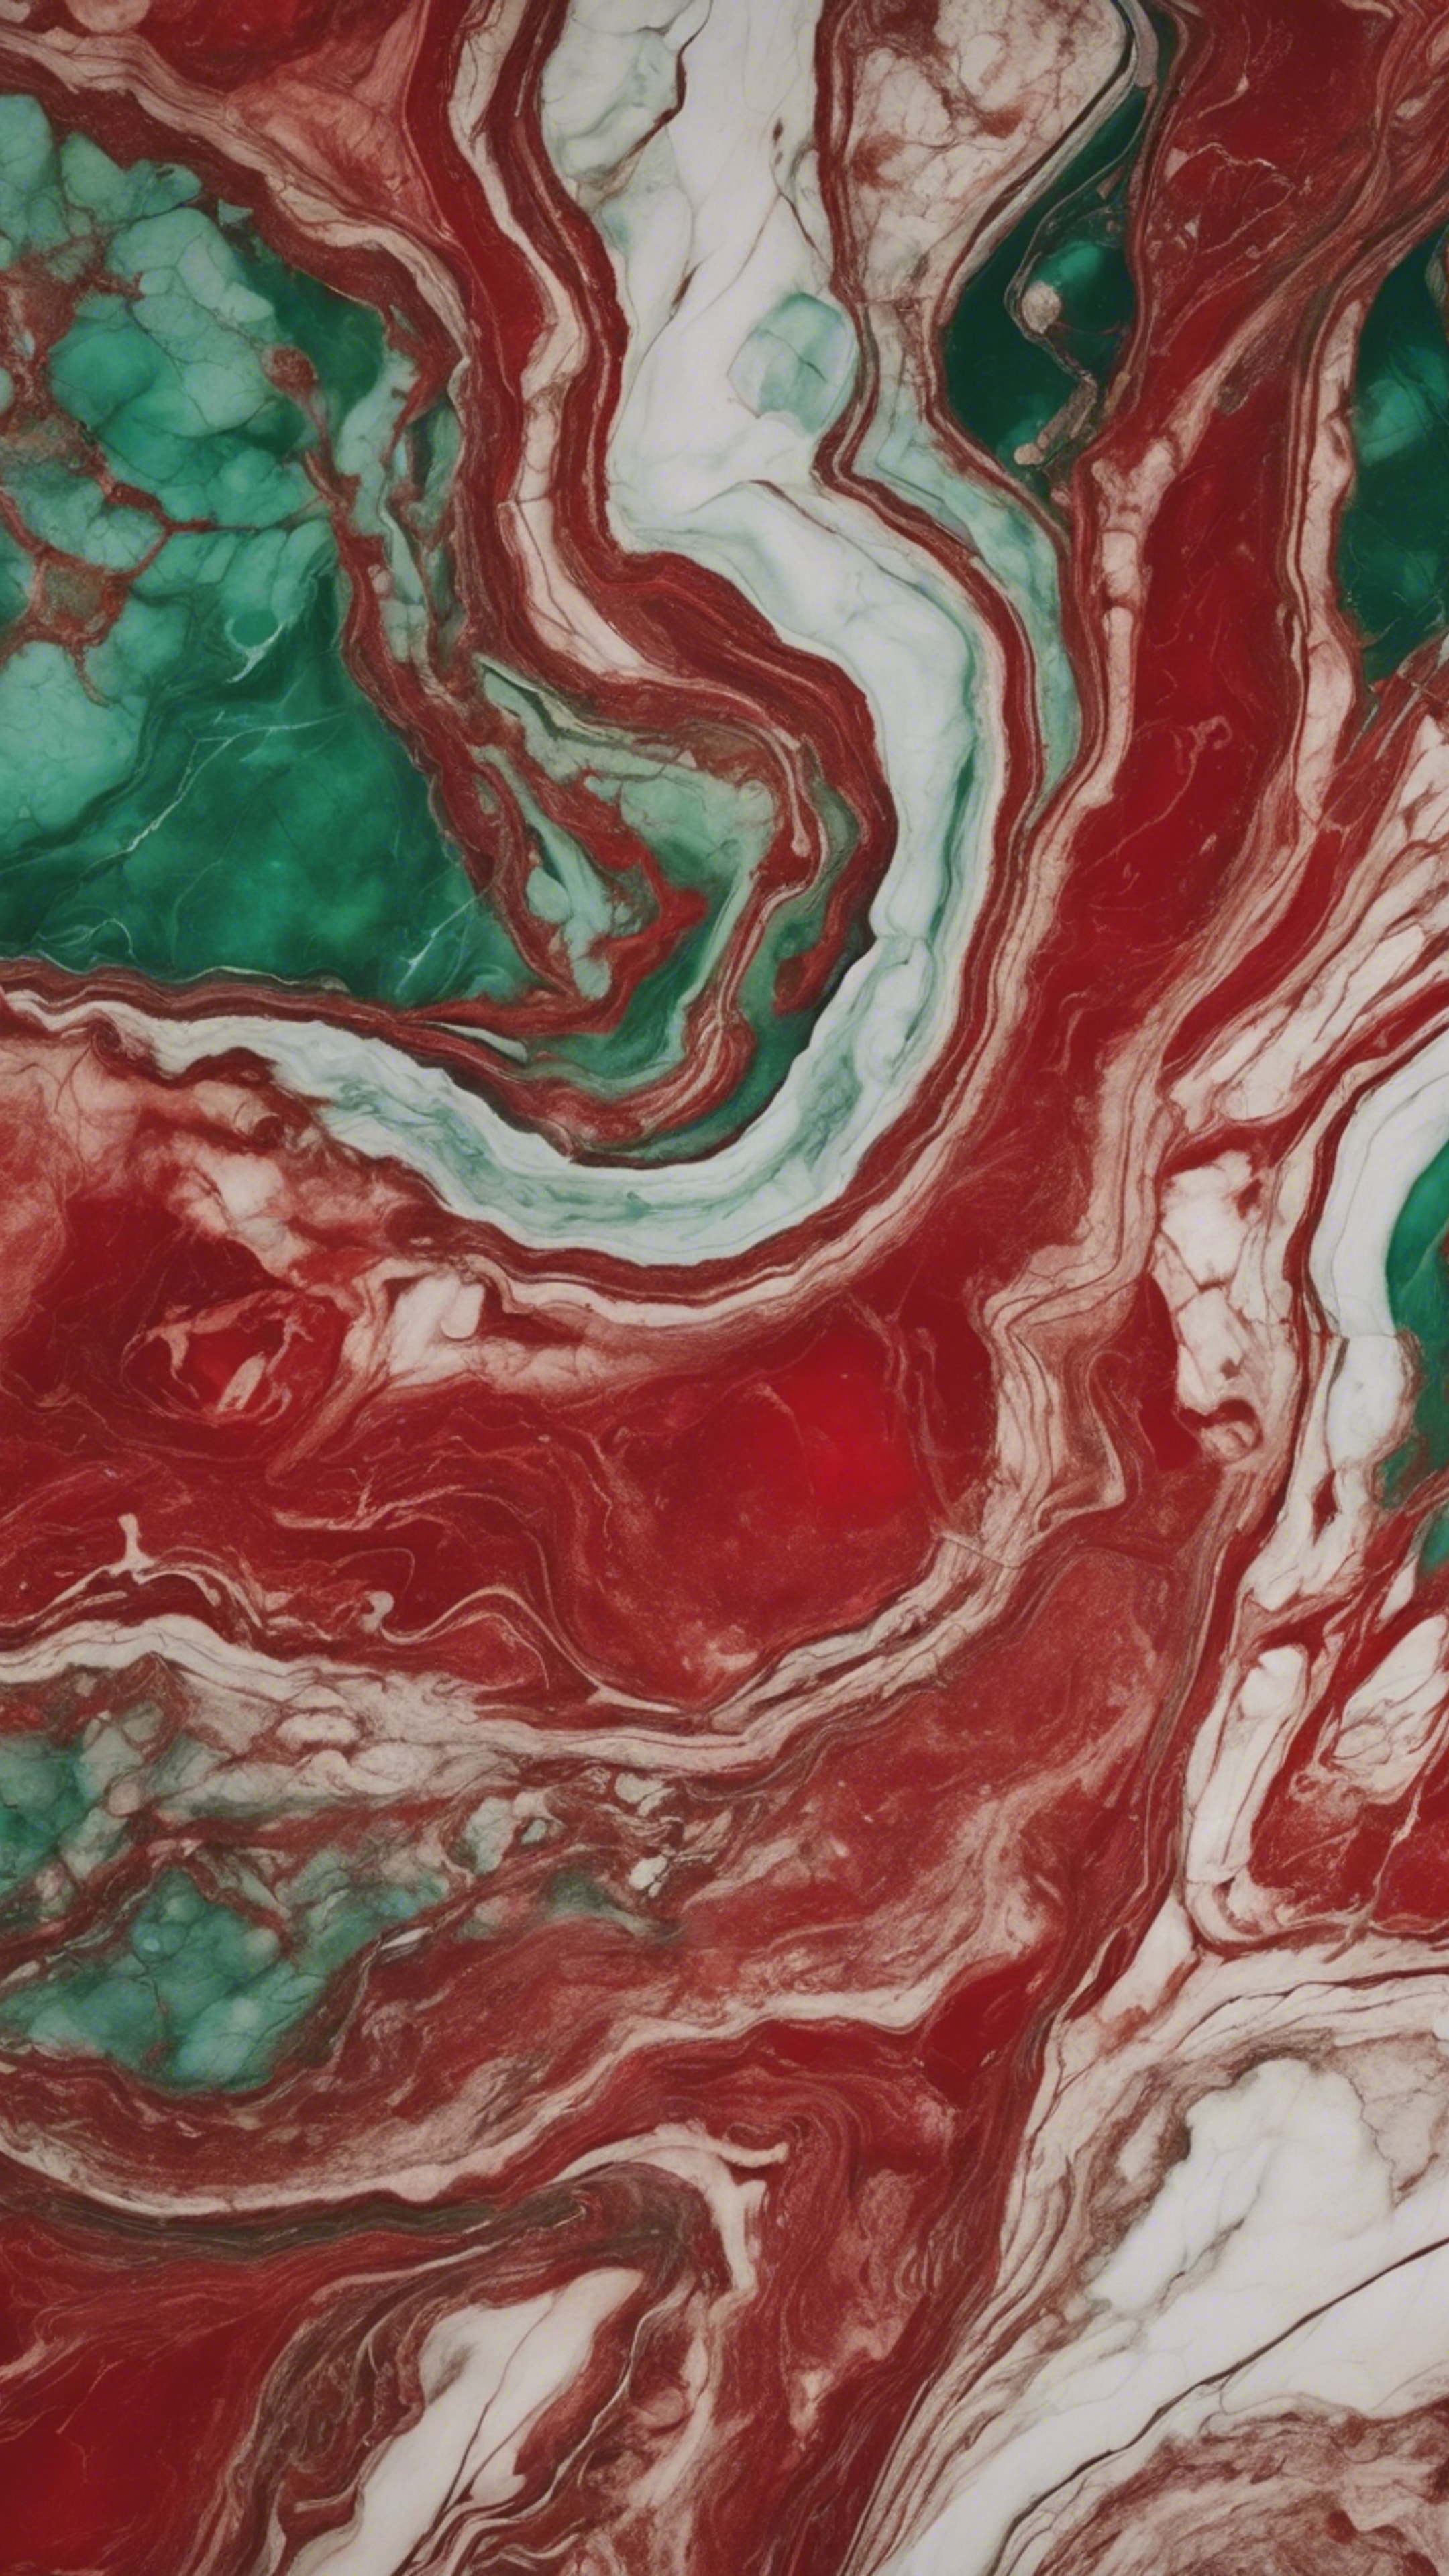 Elegant red and green marble pattern with veins running across. Wallpaper[edb4d3fbd47c4b239d5a]